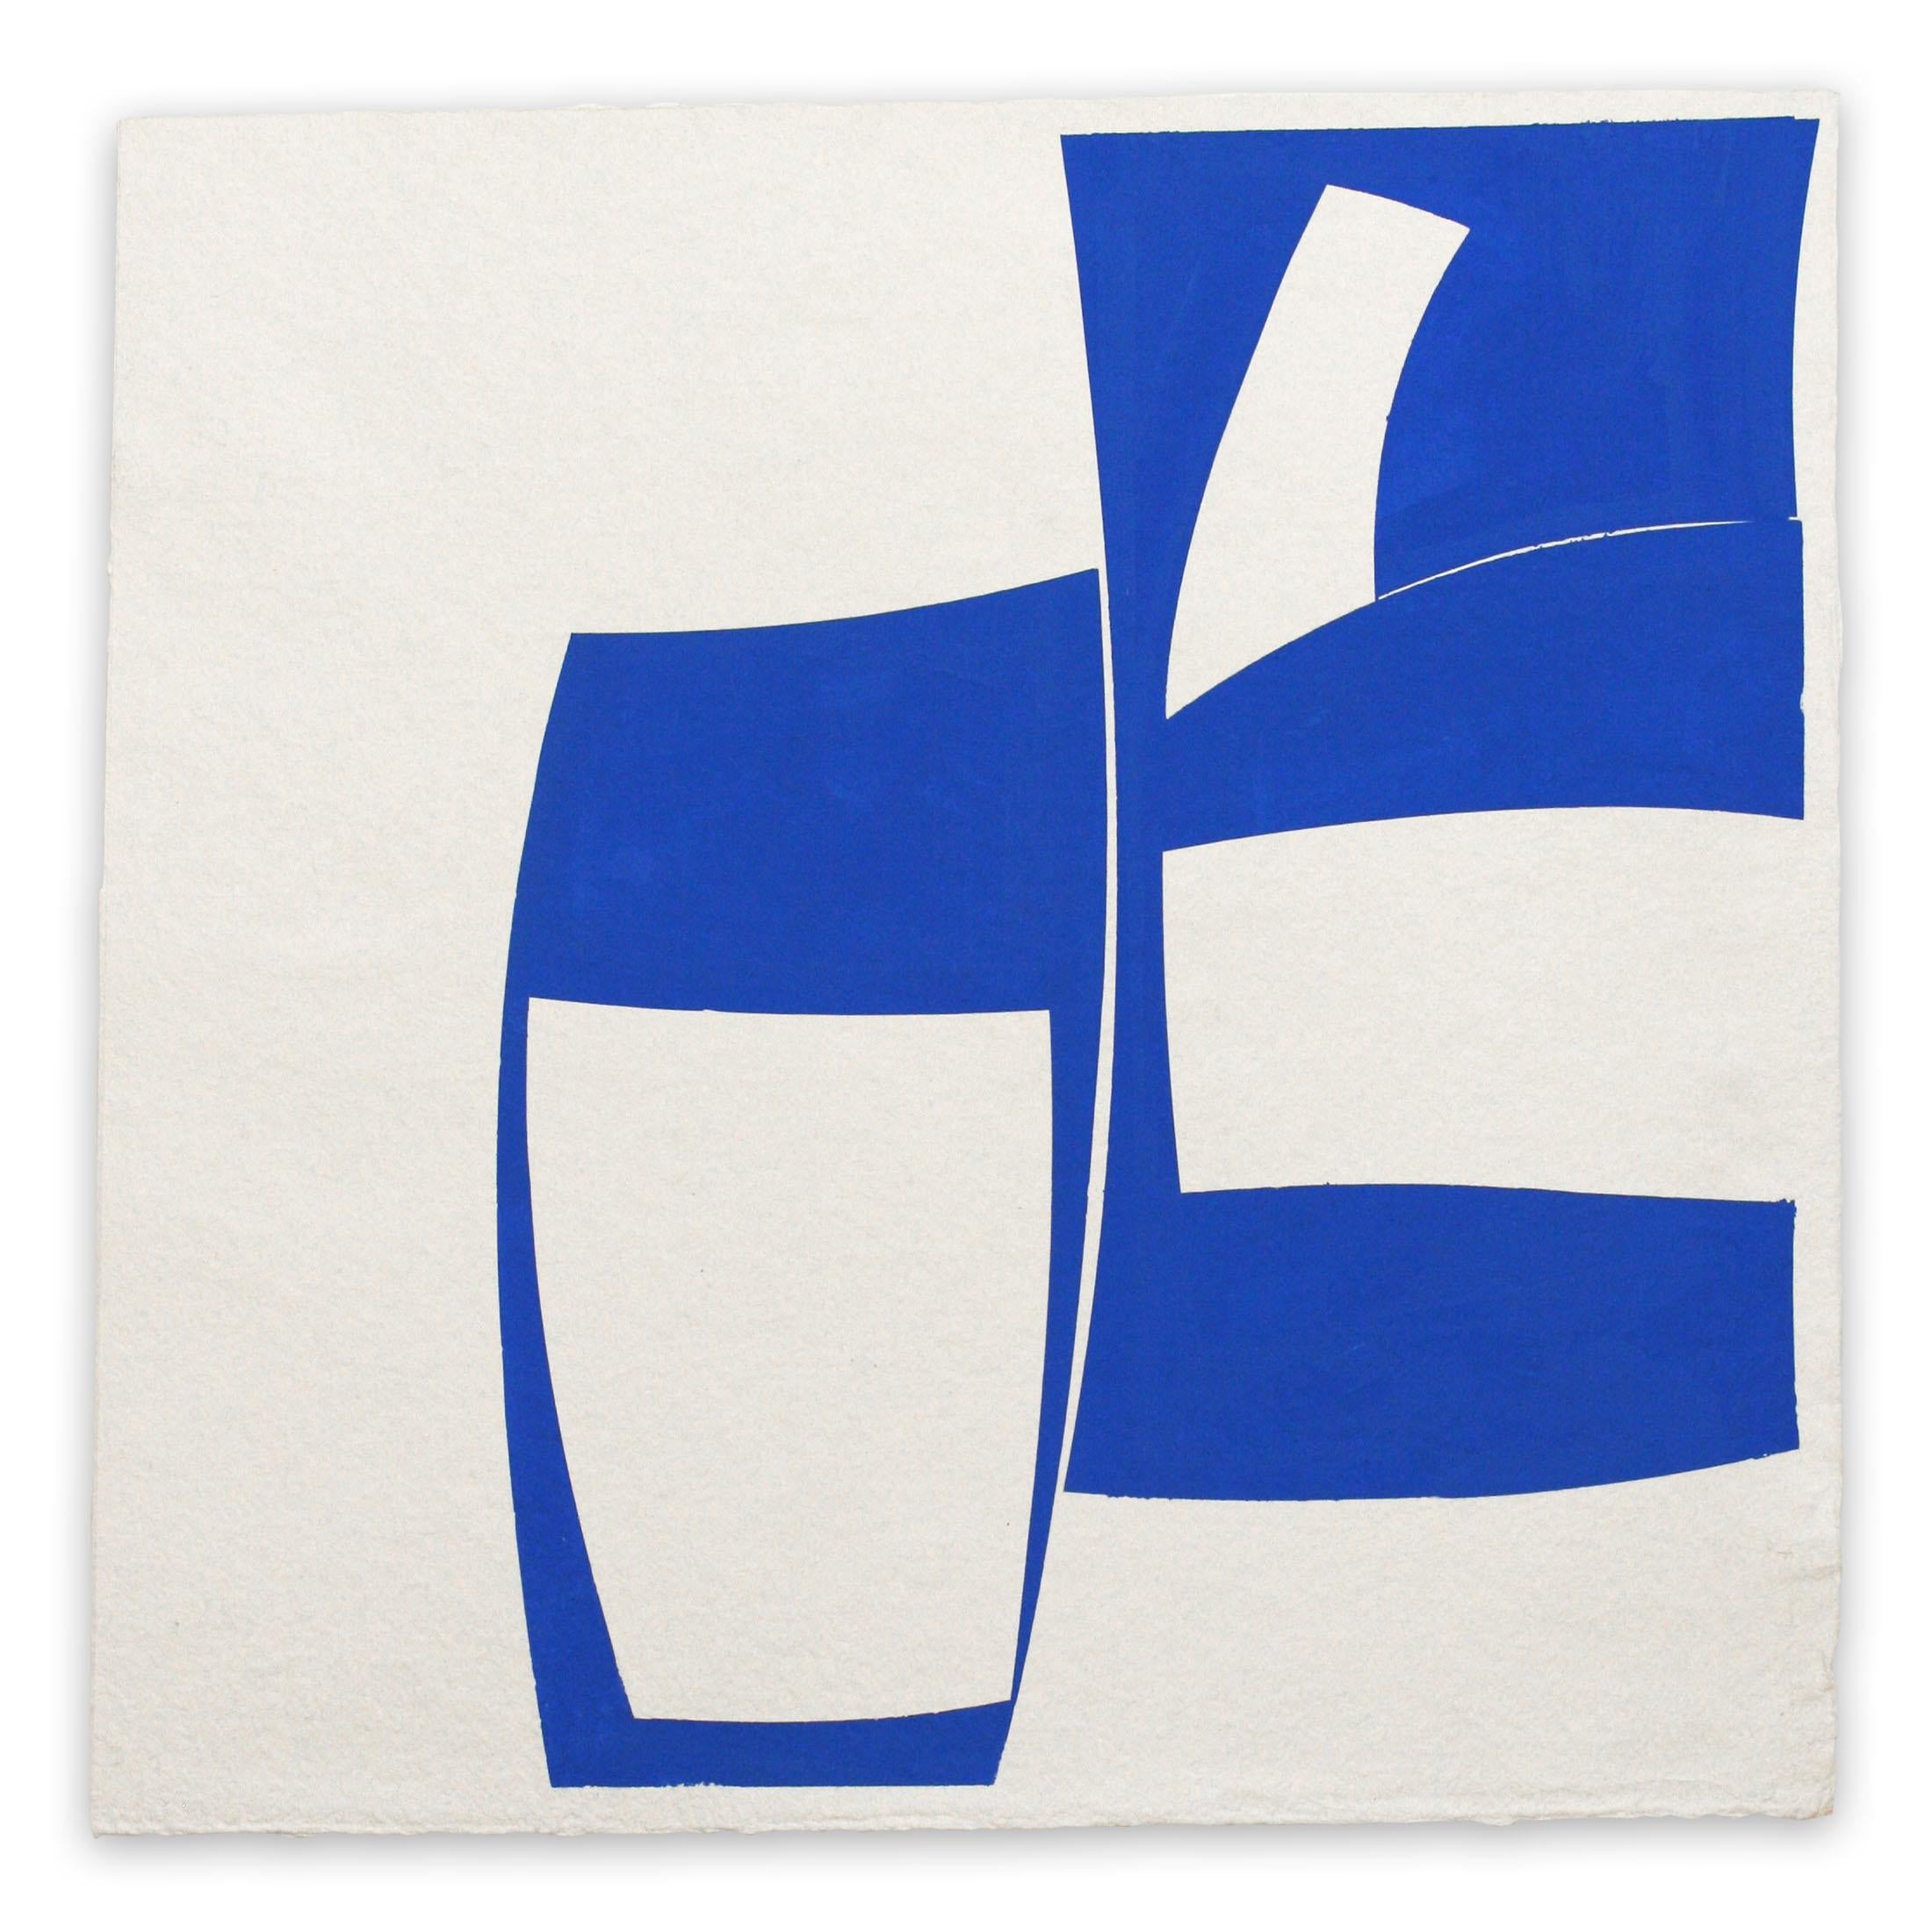 Covers 24 Blue (Abstract Painting)

Gouache on handmade paper - Unframed.

Joanne Freeman's works on paper are made with gouache on handmade Indian Khadi paper.
She uses tape to mask out shapes and employ hard edges, working spontaneously, placing